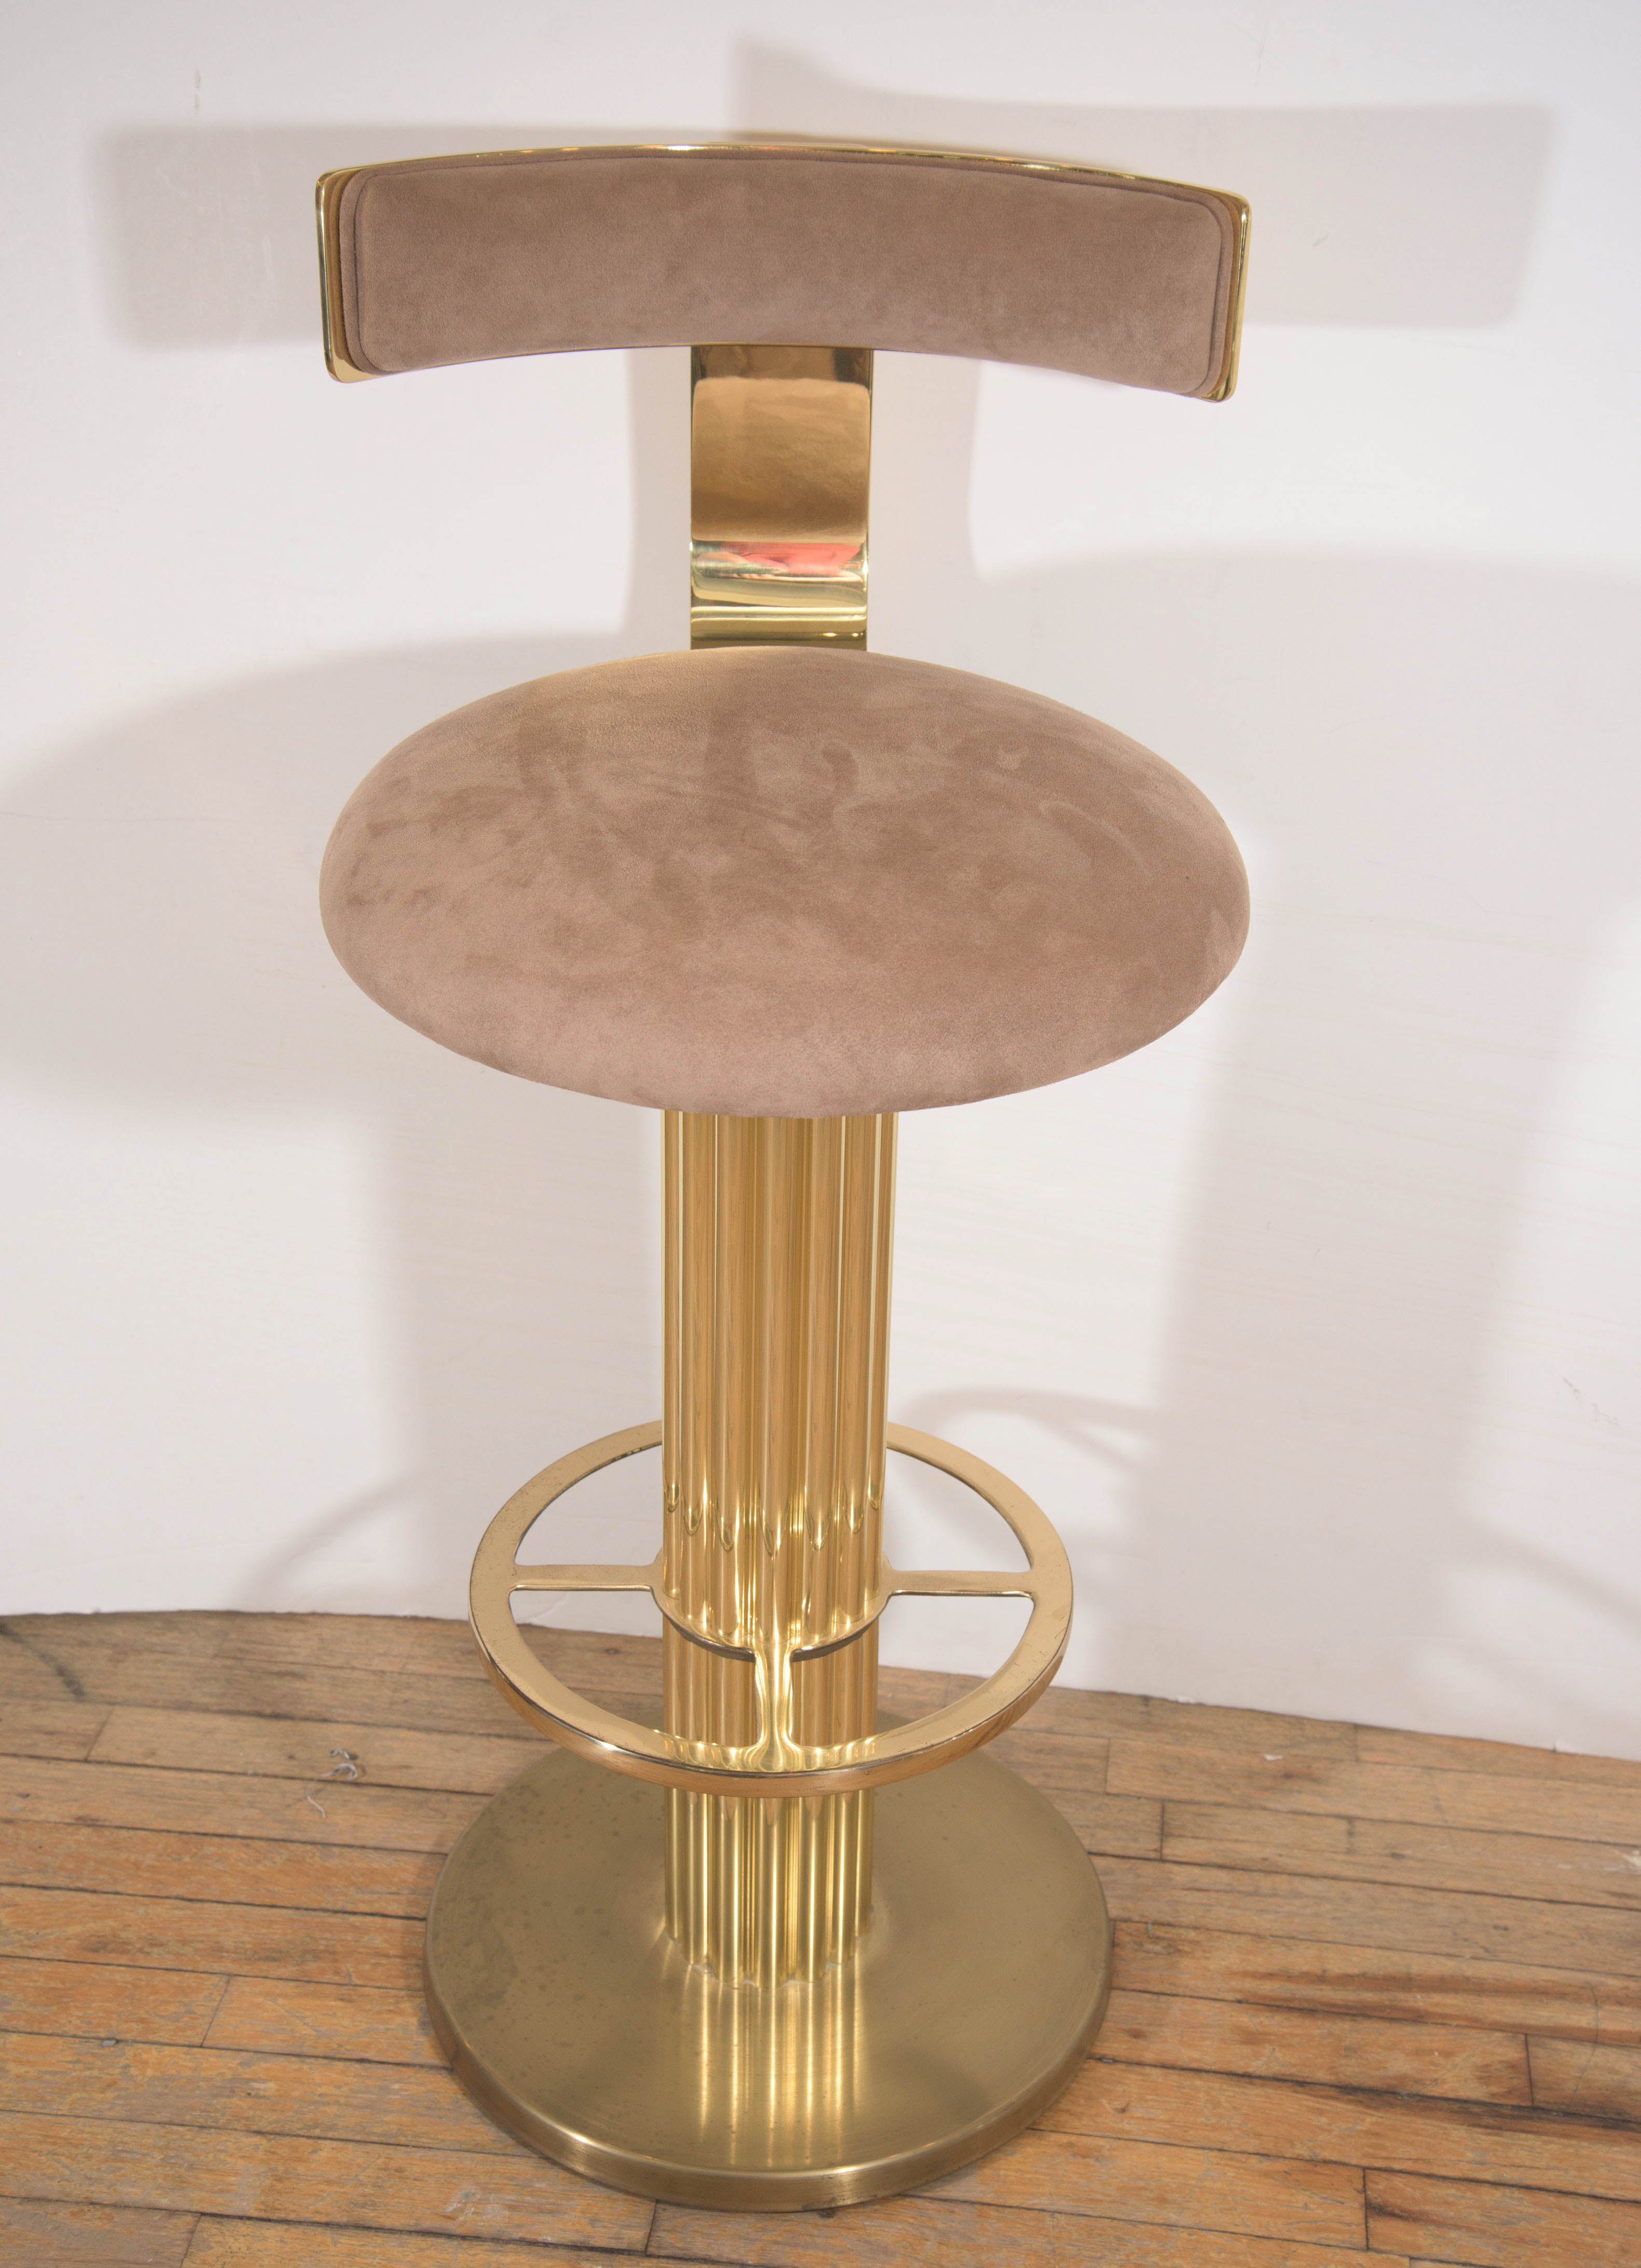 Set of Three 'Excalibur' Brass Bar Stools with Suede Seats by Design For Leisure